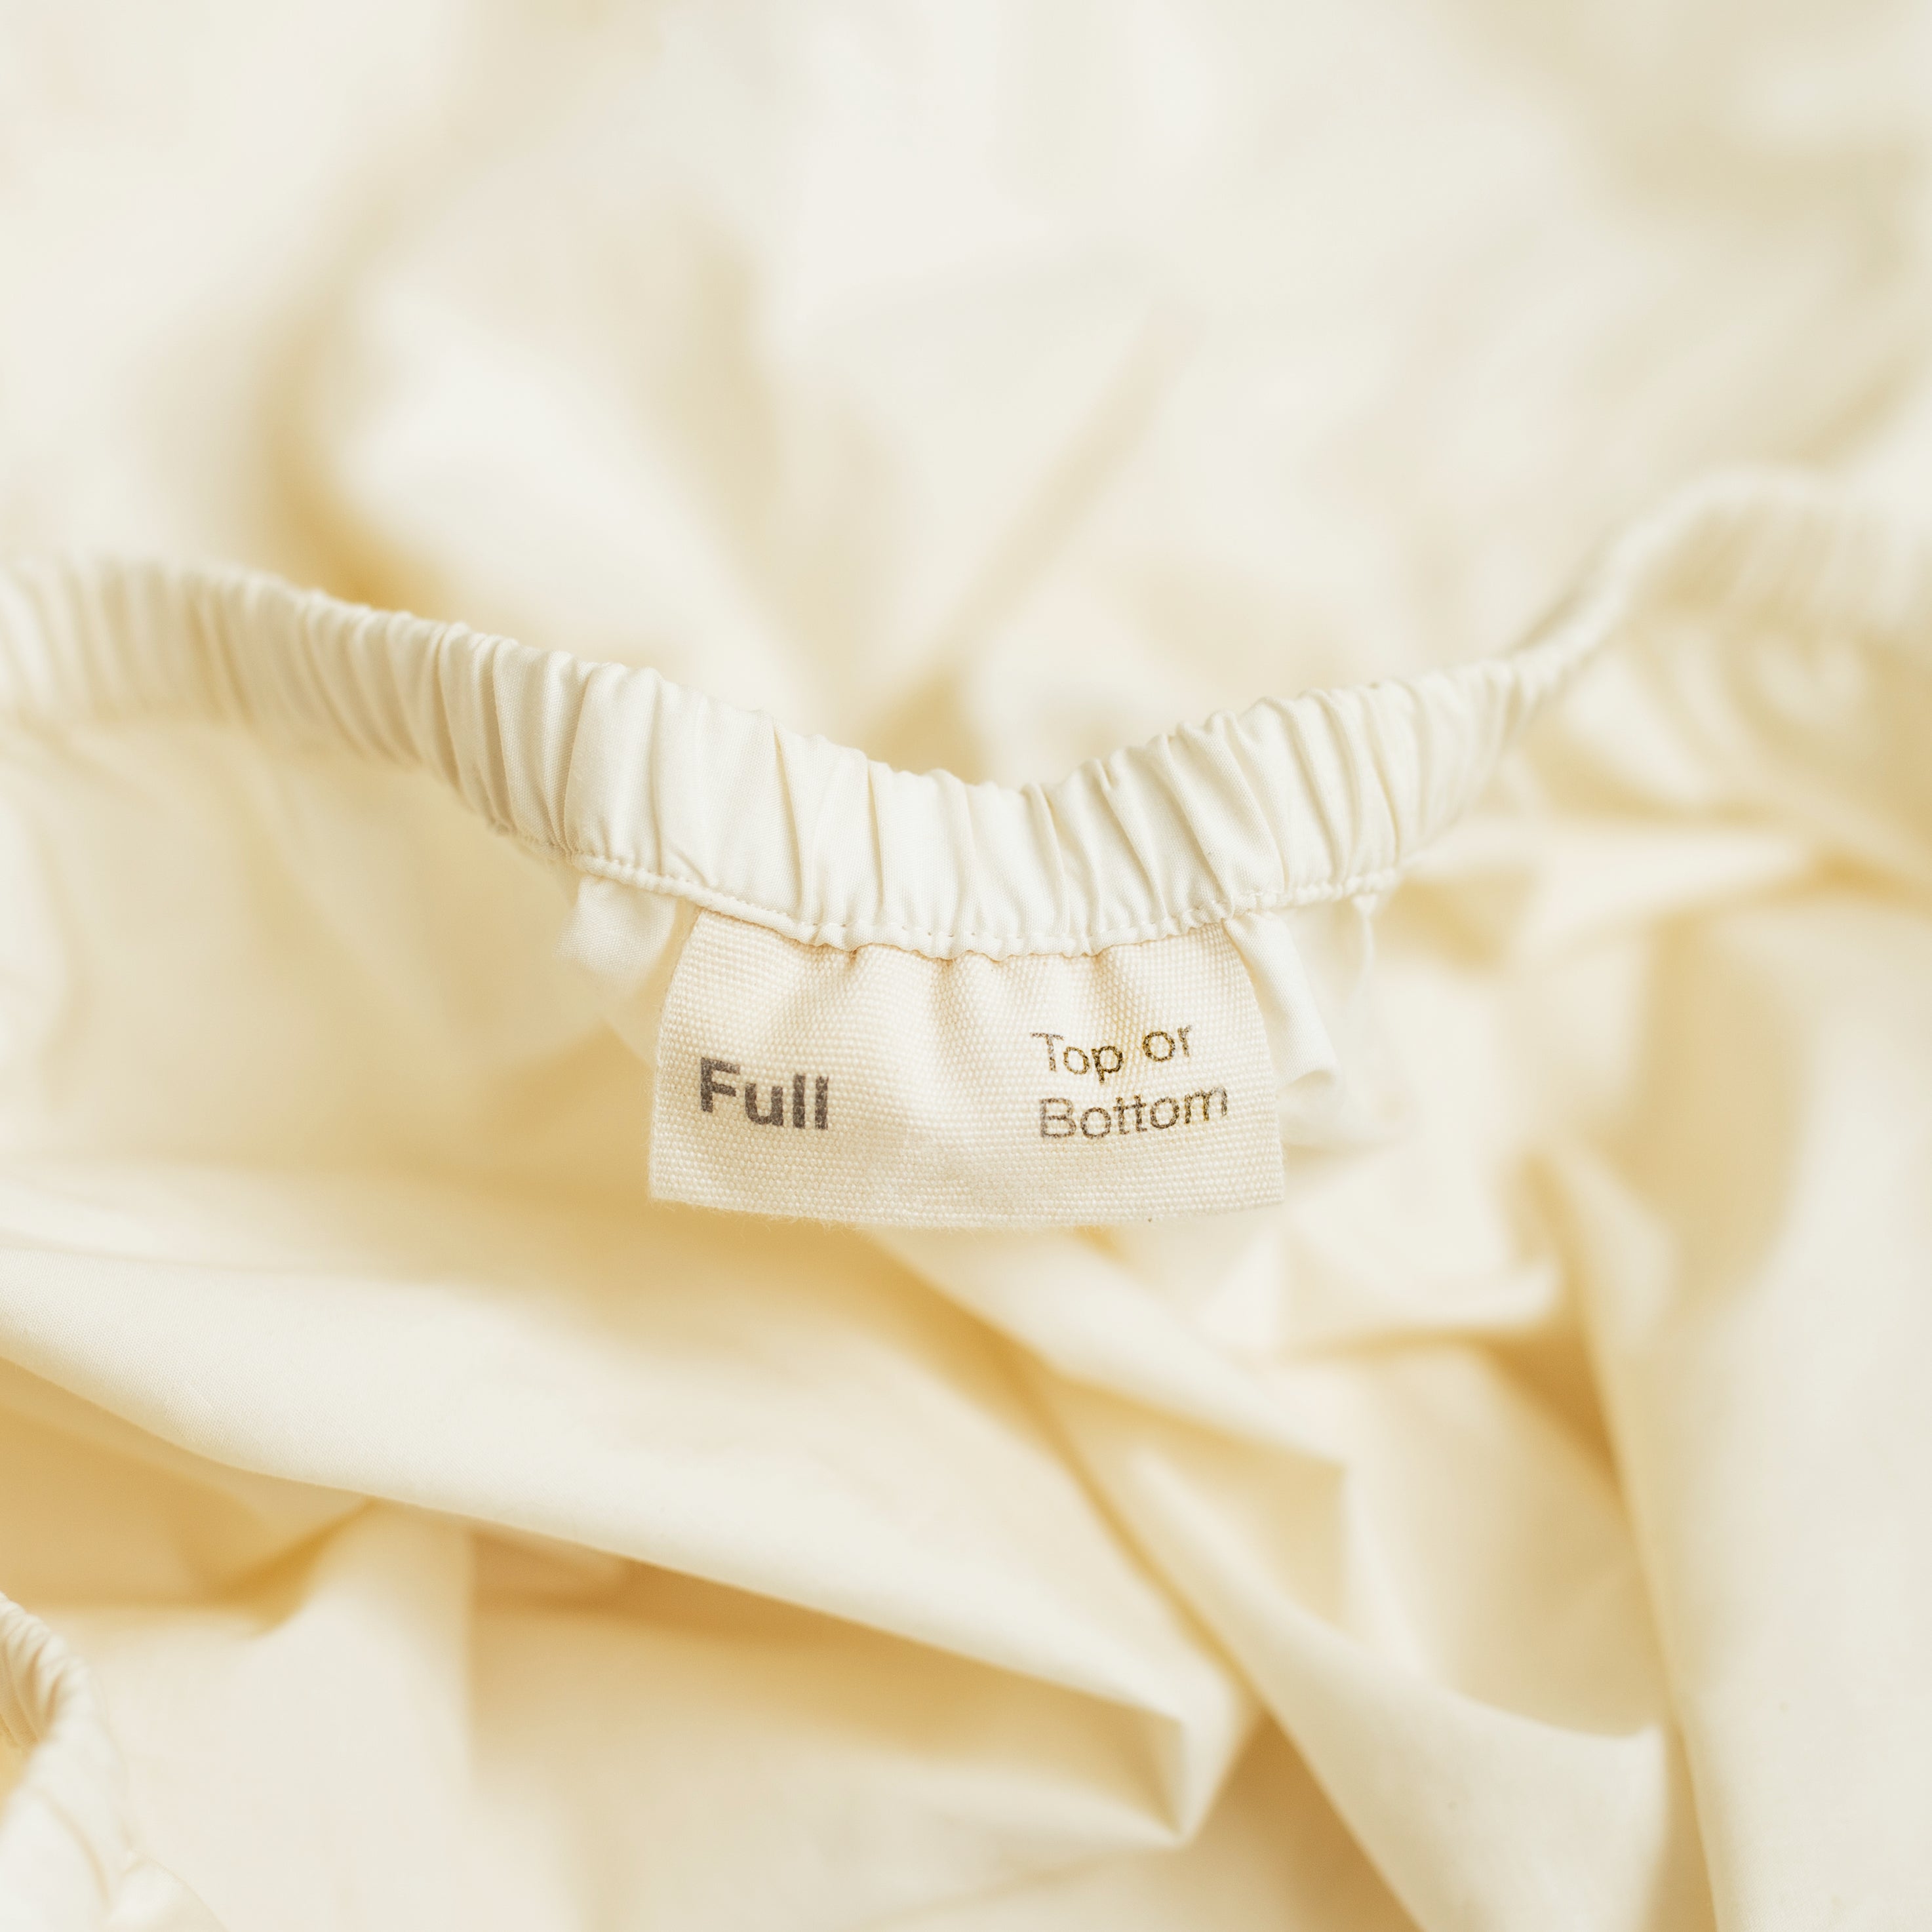 A detail view of the orientation label on an Oolie Deep Fitted Sheet, indicated "Full" size and marking the "Top or Bottom" of the sheet.